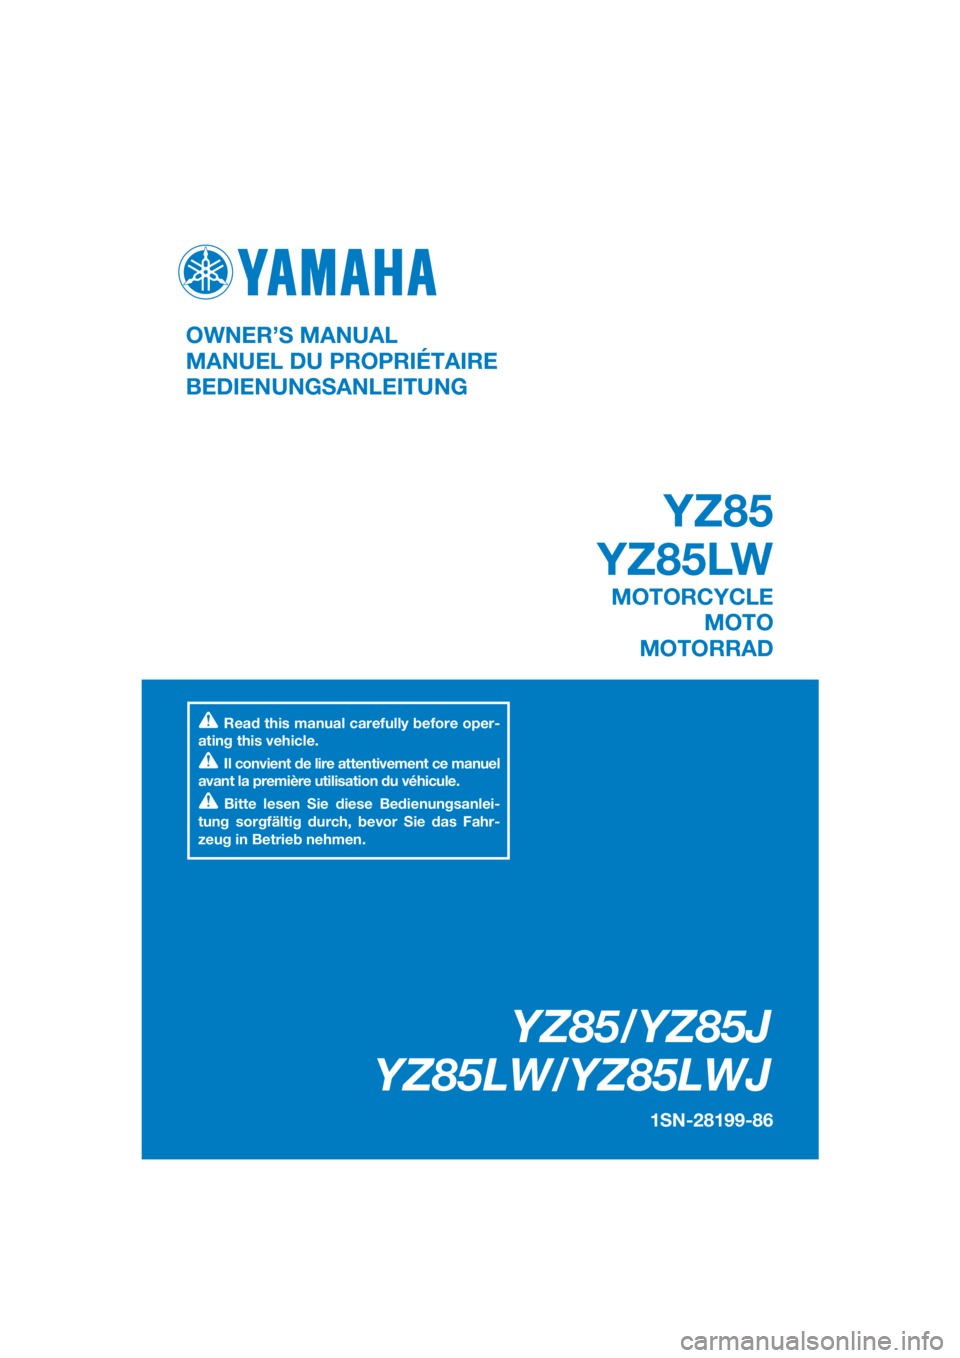 YAMAHA YZ85 2018  Notices Demploi (in French) DIC183
YZ85/YZ85J
YZ85LW/YZ85LWJ
1SN-28199-86
OWNER’S MANUAL
MANUEL DU PROPRIÉTAIRE
BEDIENUNGSANLEITUNG
Read this manual carefully before oper-
ating this vehicle.
Il convient de lire attentivement